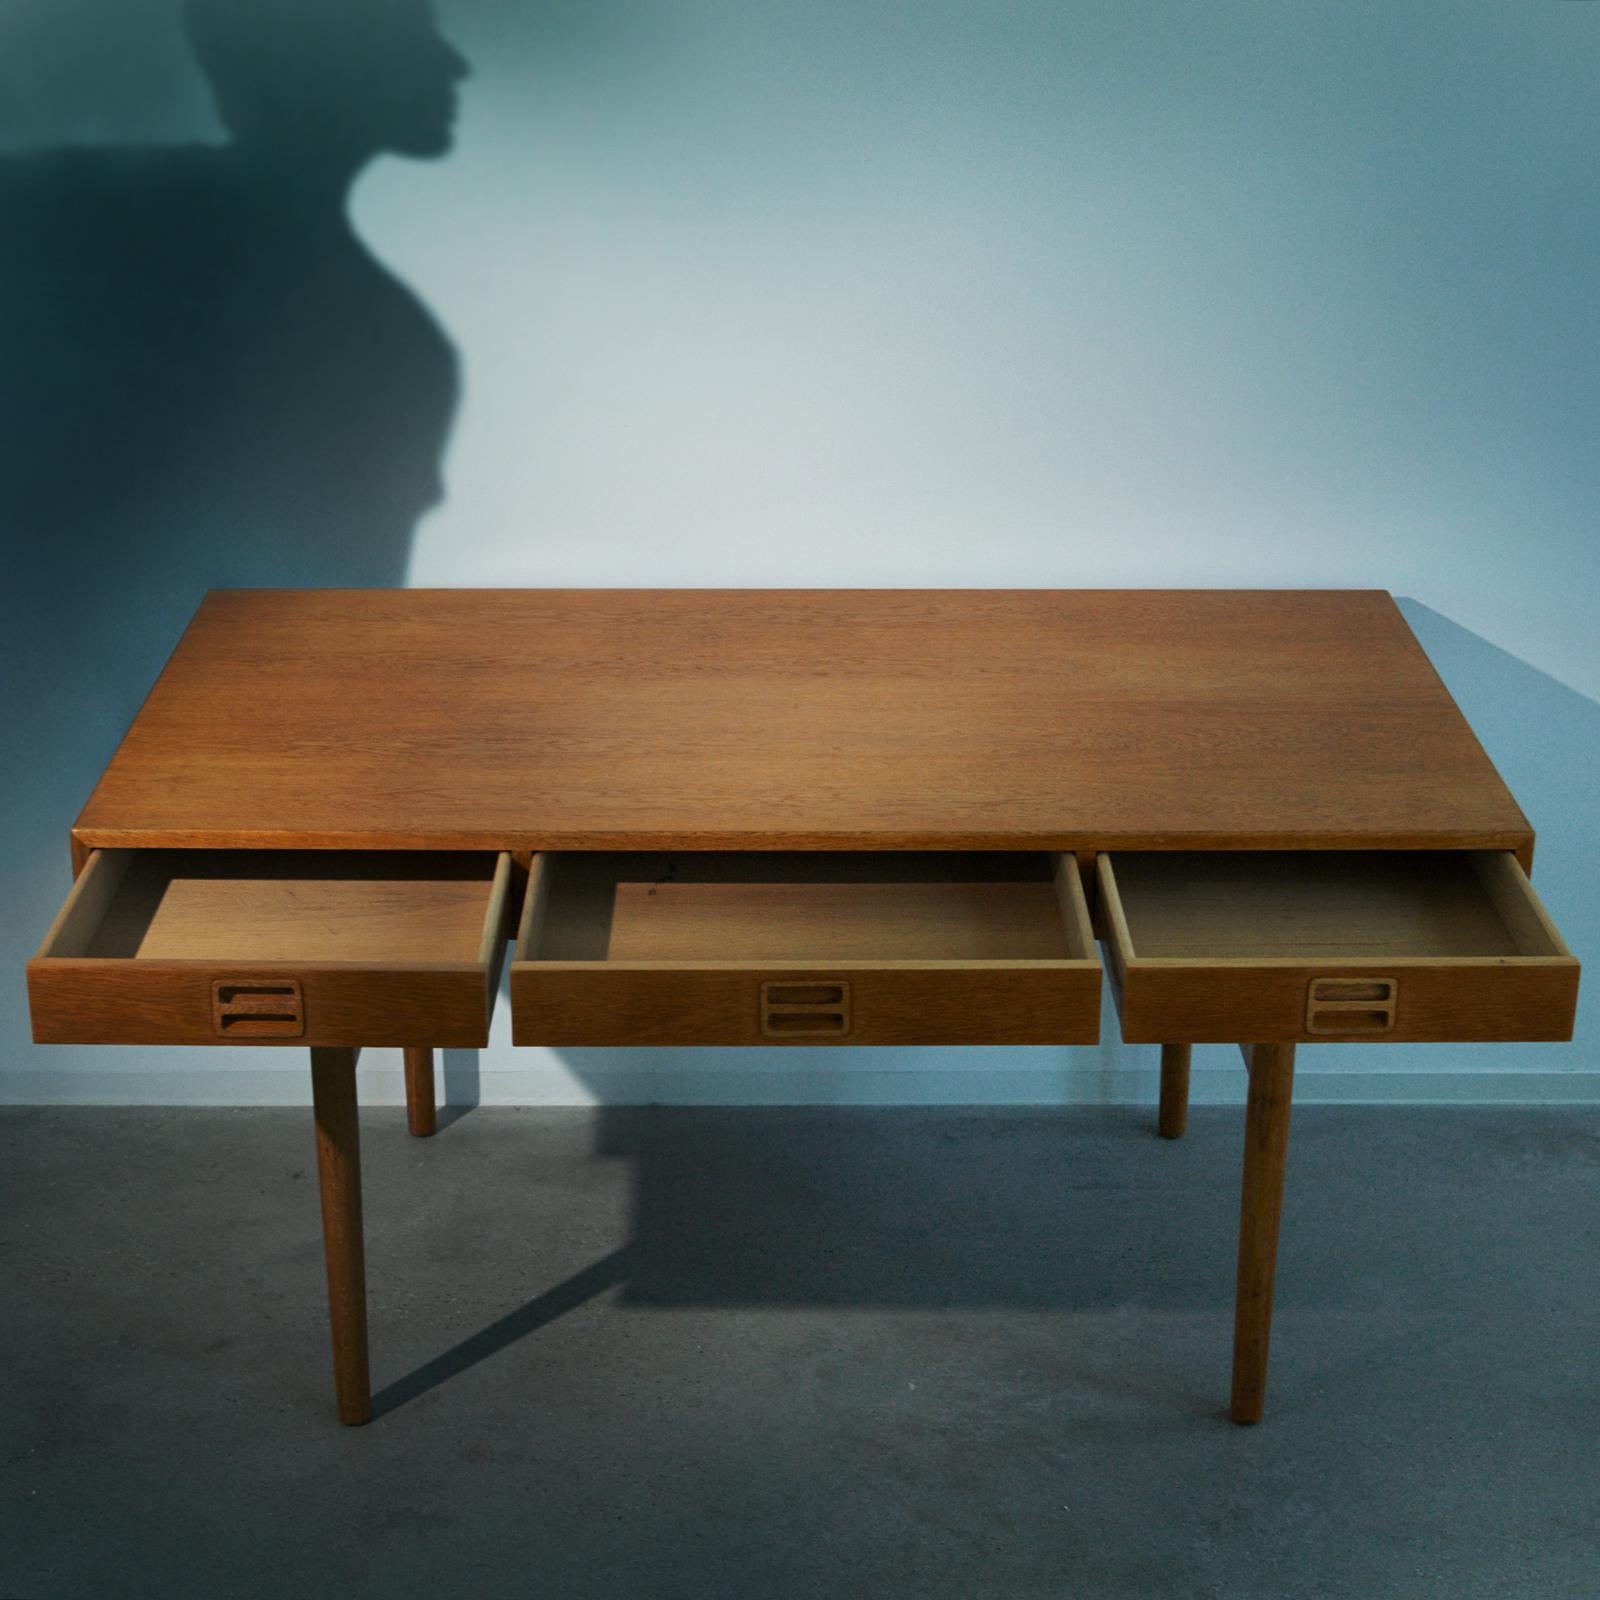 Desk model ND 93 by Nanna Ditzel

Designed in 1958. 
Produced by Søren Willadsen. 
Oak desk with three drawers. 
Measures: H. 72 L. 145 B. 75 cm.

Nanna Ditzel (1923-2005) was a Danish designer and architect. She has often been called, ‘The First